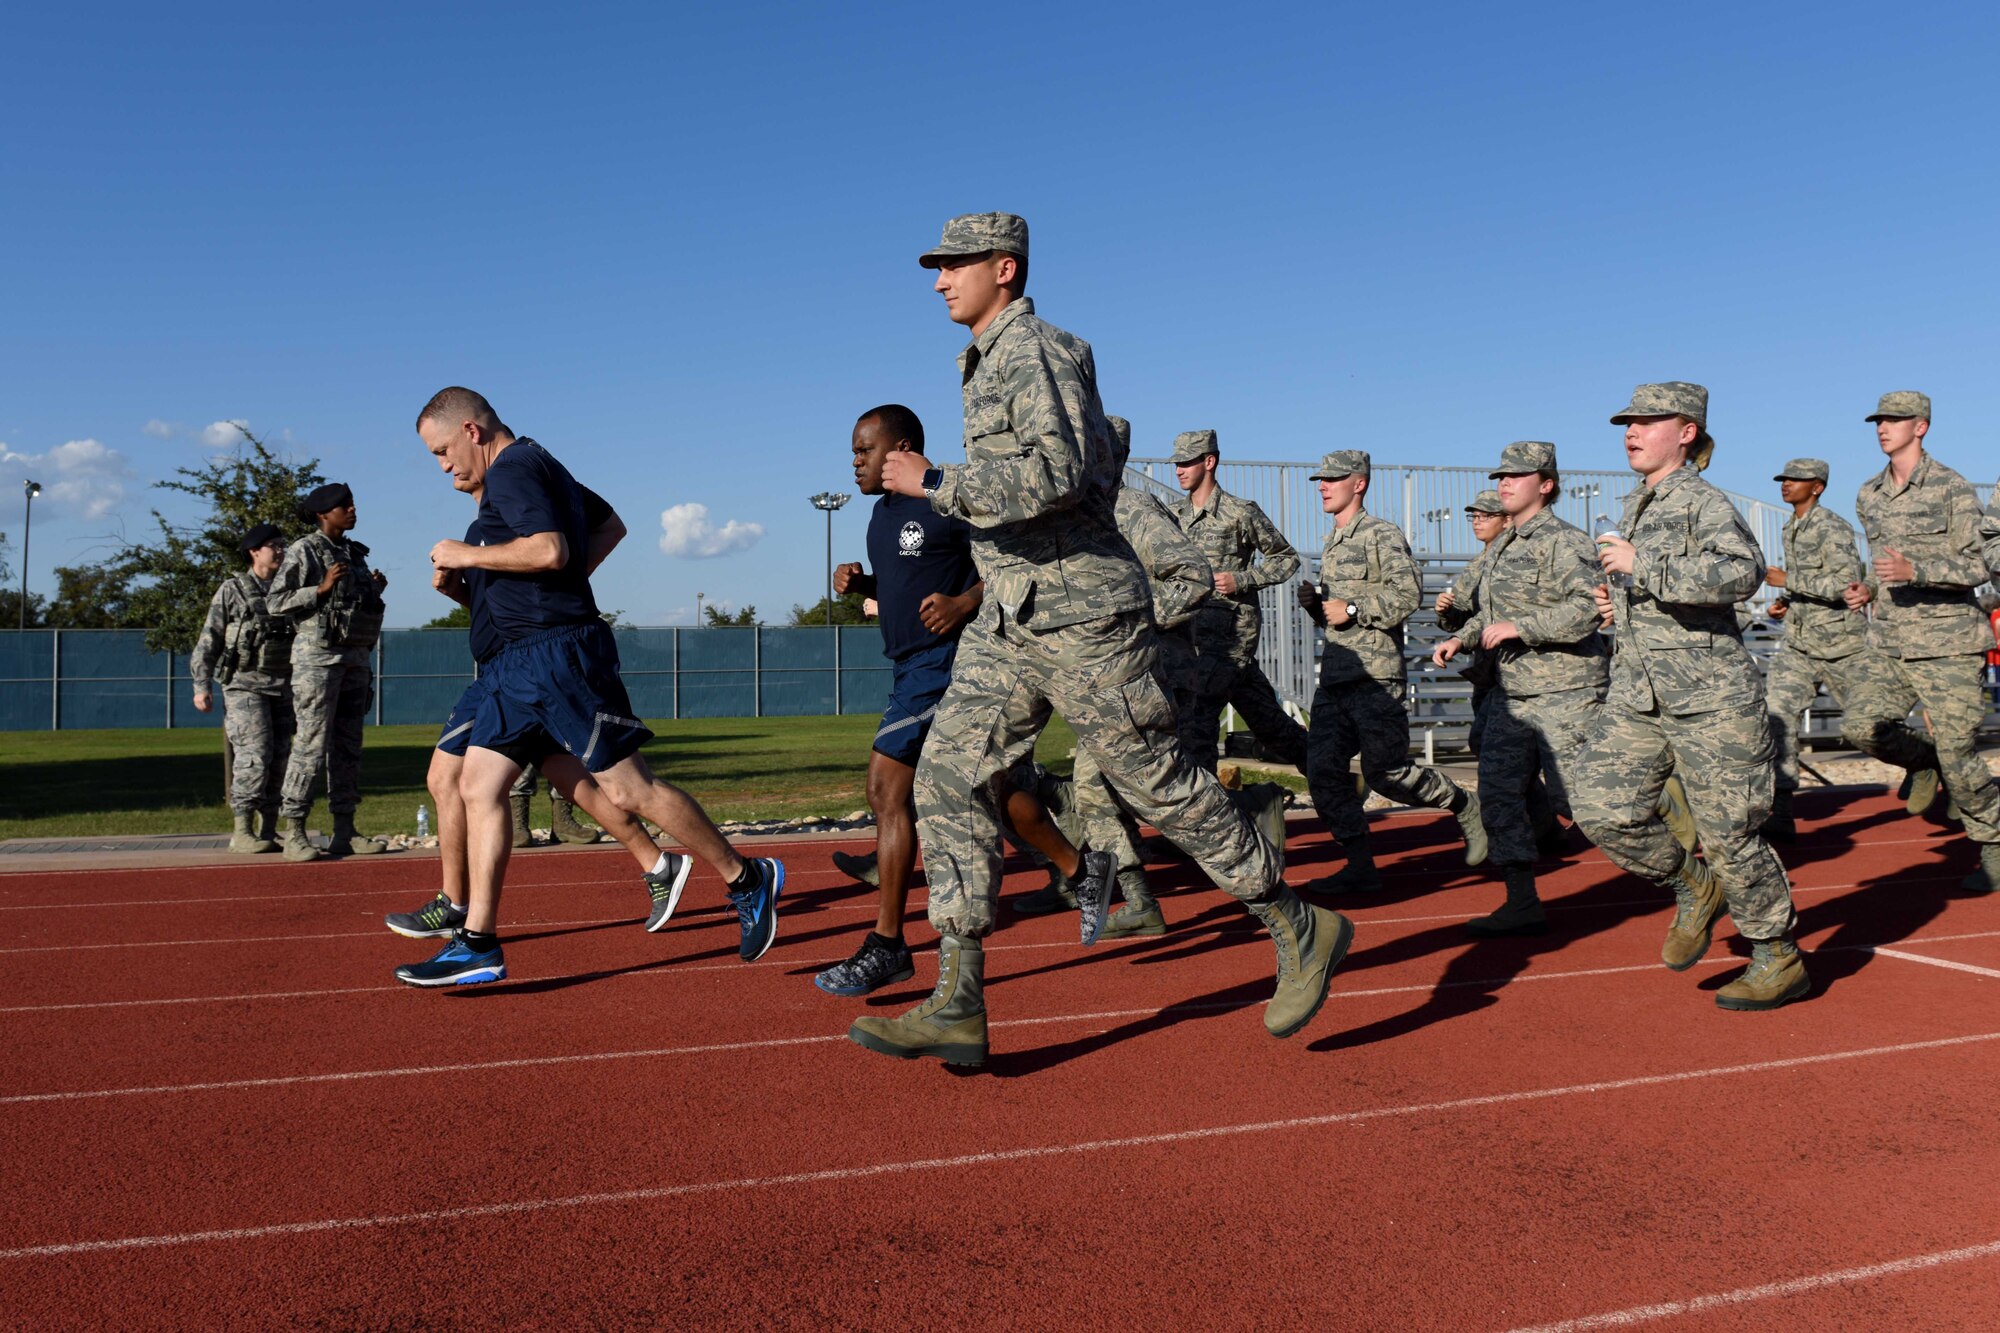 Airmen from the 315th Training Squadron run during the 24-hour Prisoners of War and Missing in Action Vigil at the track on Goodfellow Air Force Base, Texas, Oct. 26, 2018. Individuals carried the baton for 24 hours, passing it to others while running to ensure that it didn’t stop moving. (U.S. Air Force photo by Senior Airman Randall Moose/Released)